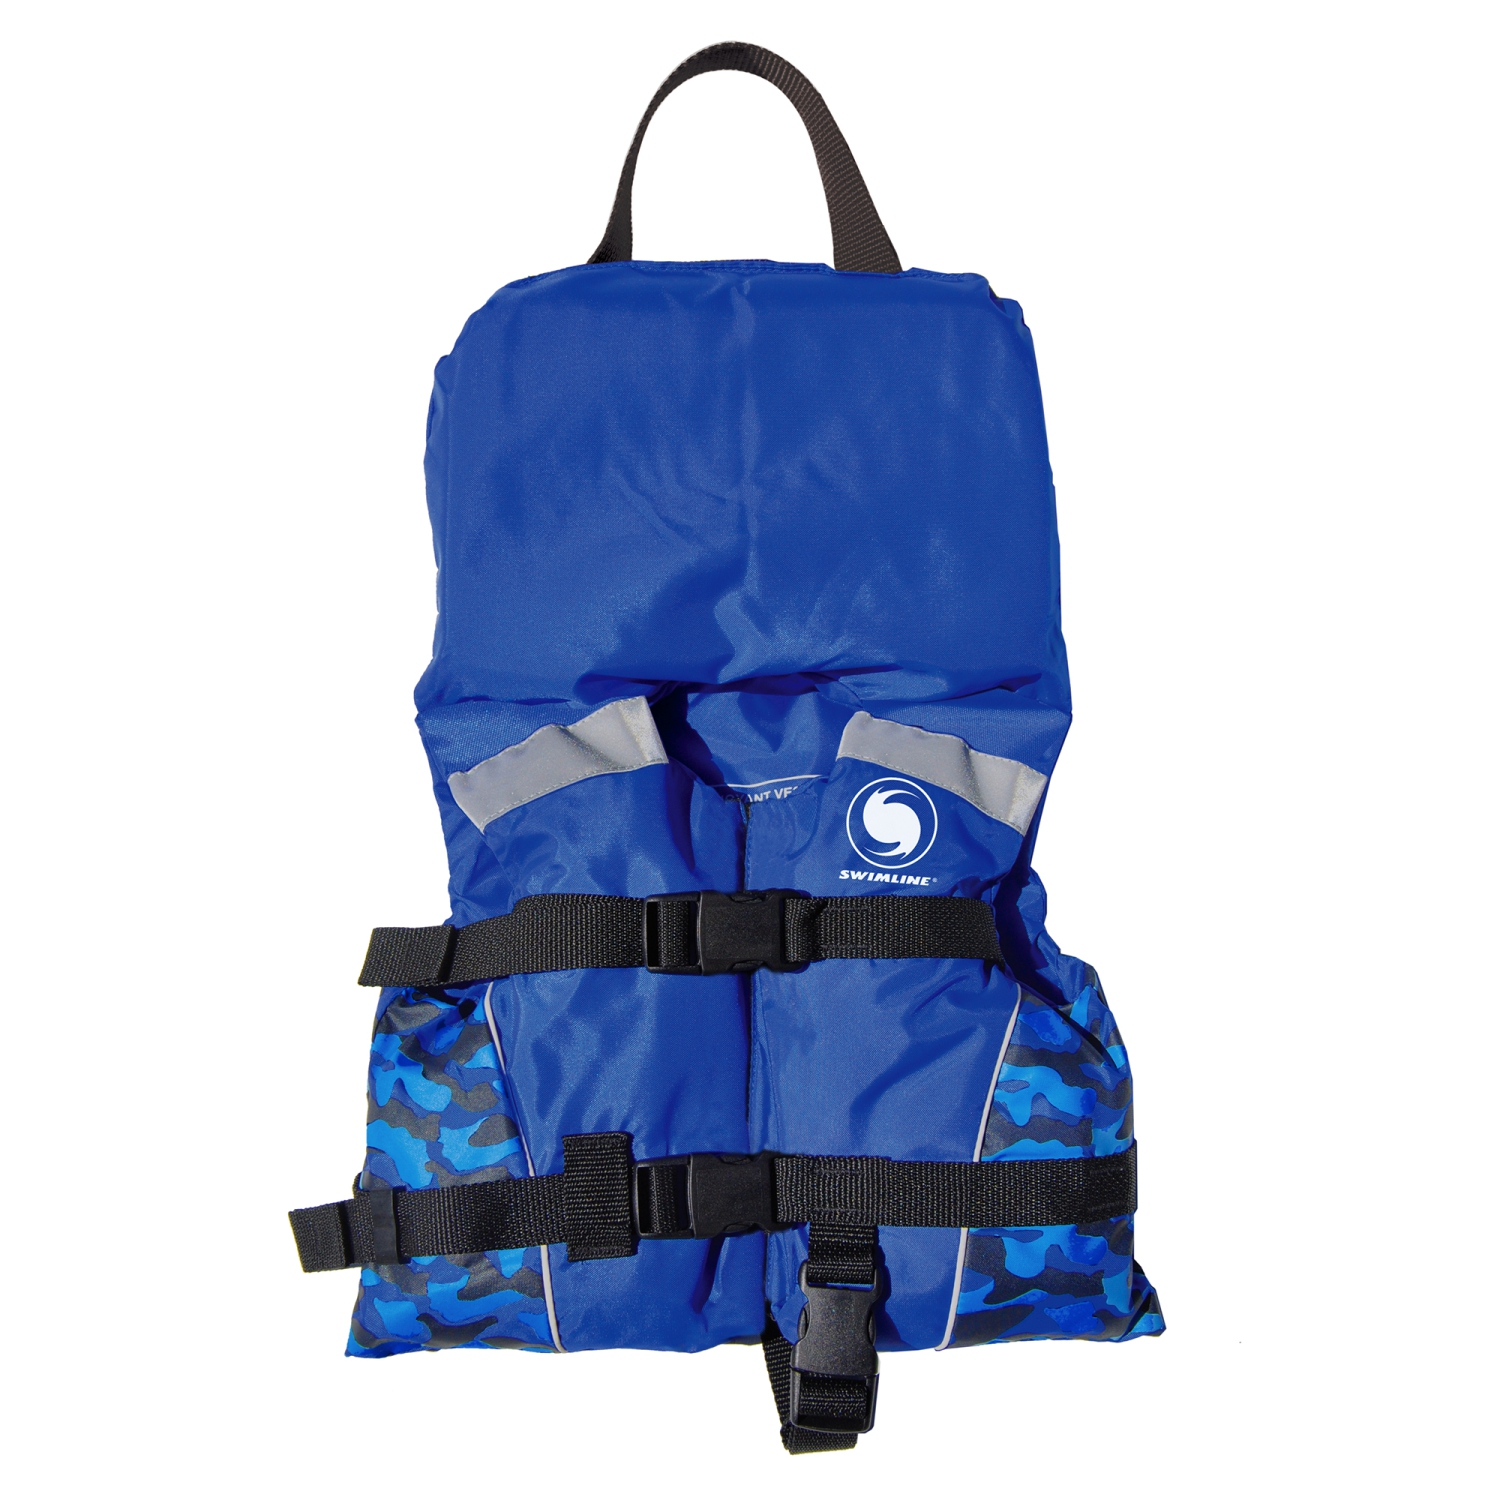 Swimline USCG Approved Blue Infant Life Vest with Handle for Boys - Up to 30lbs